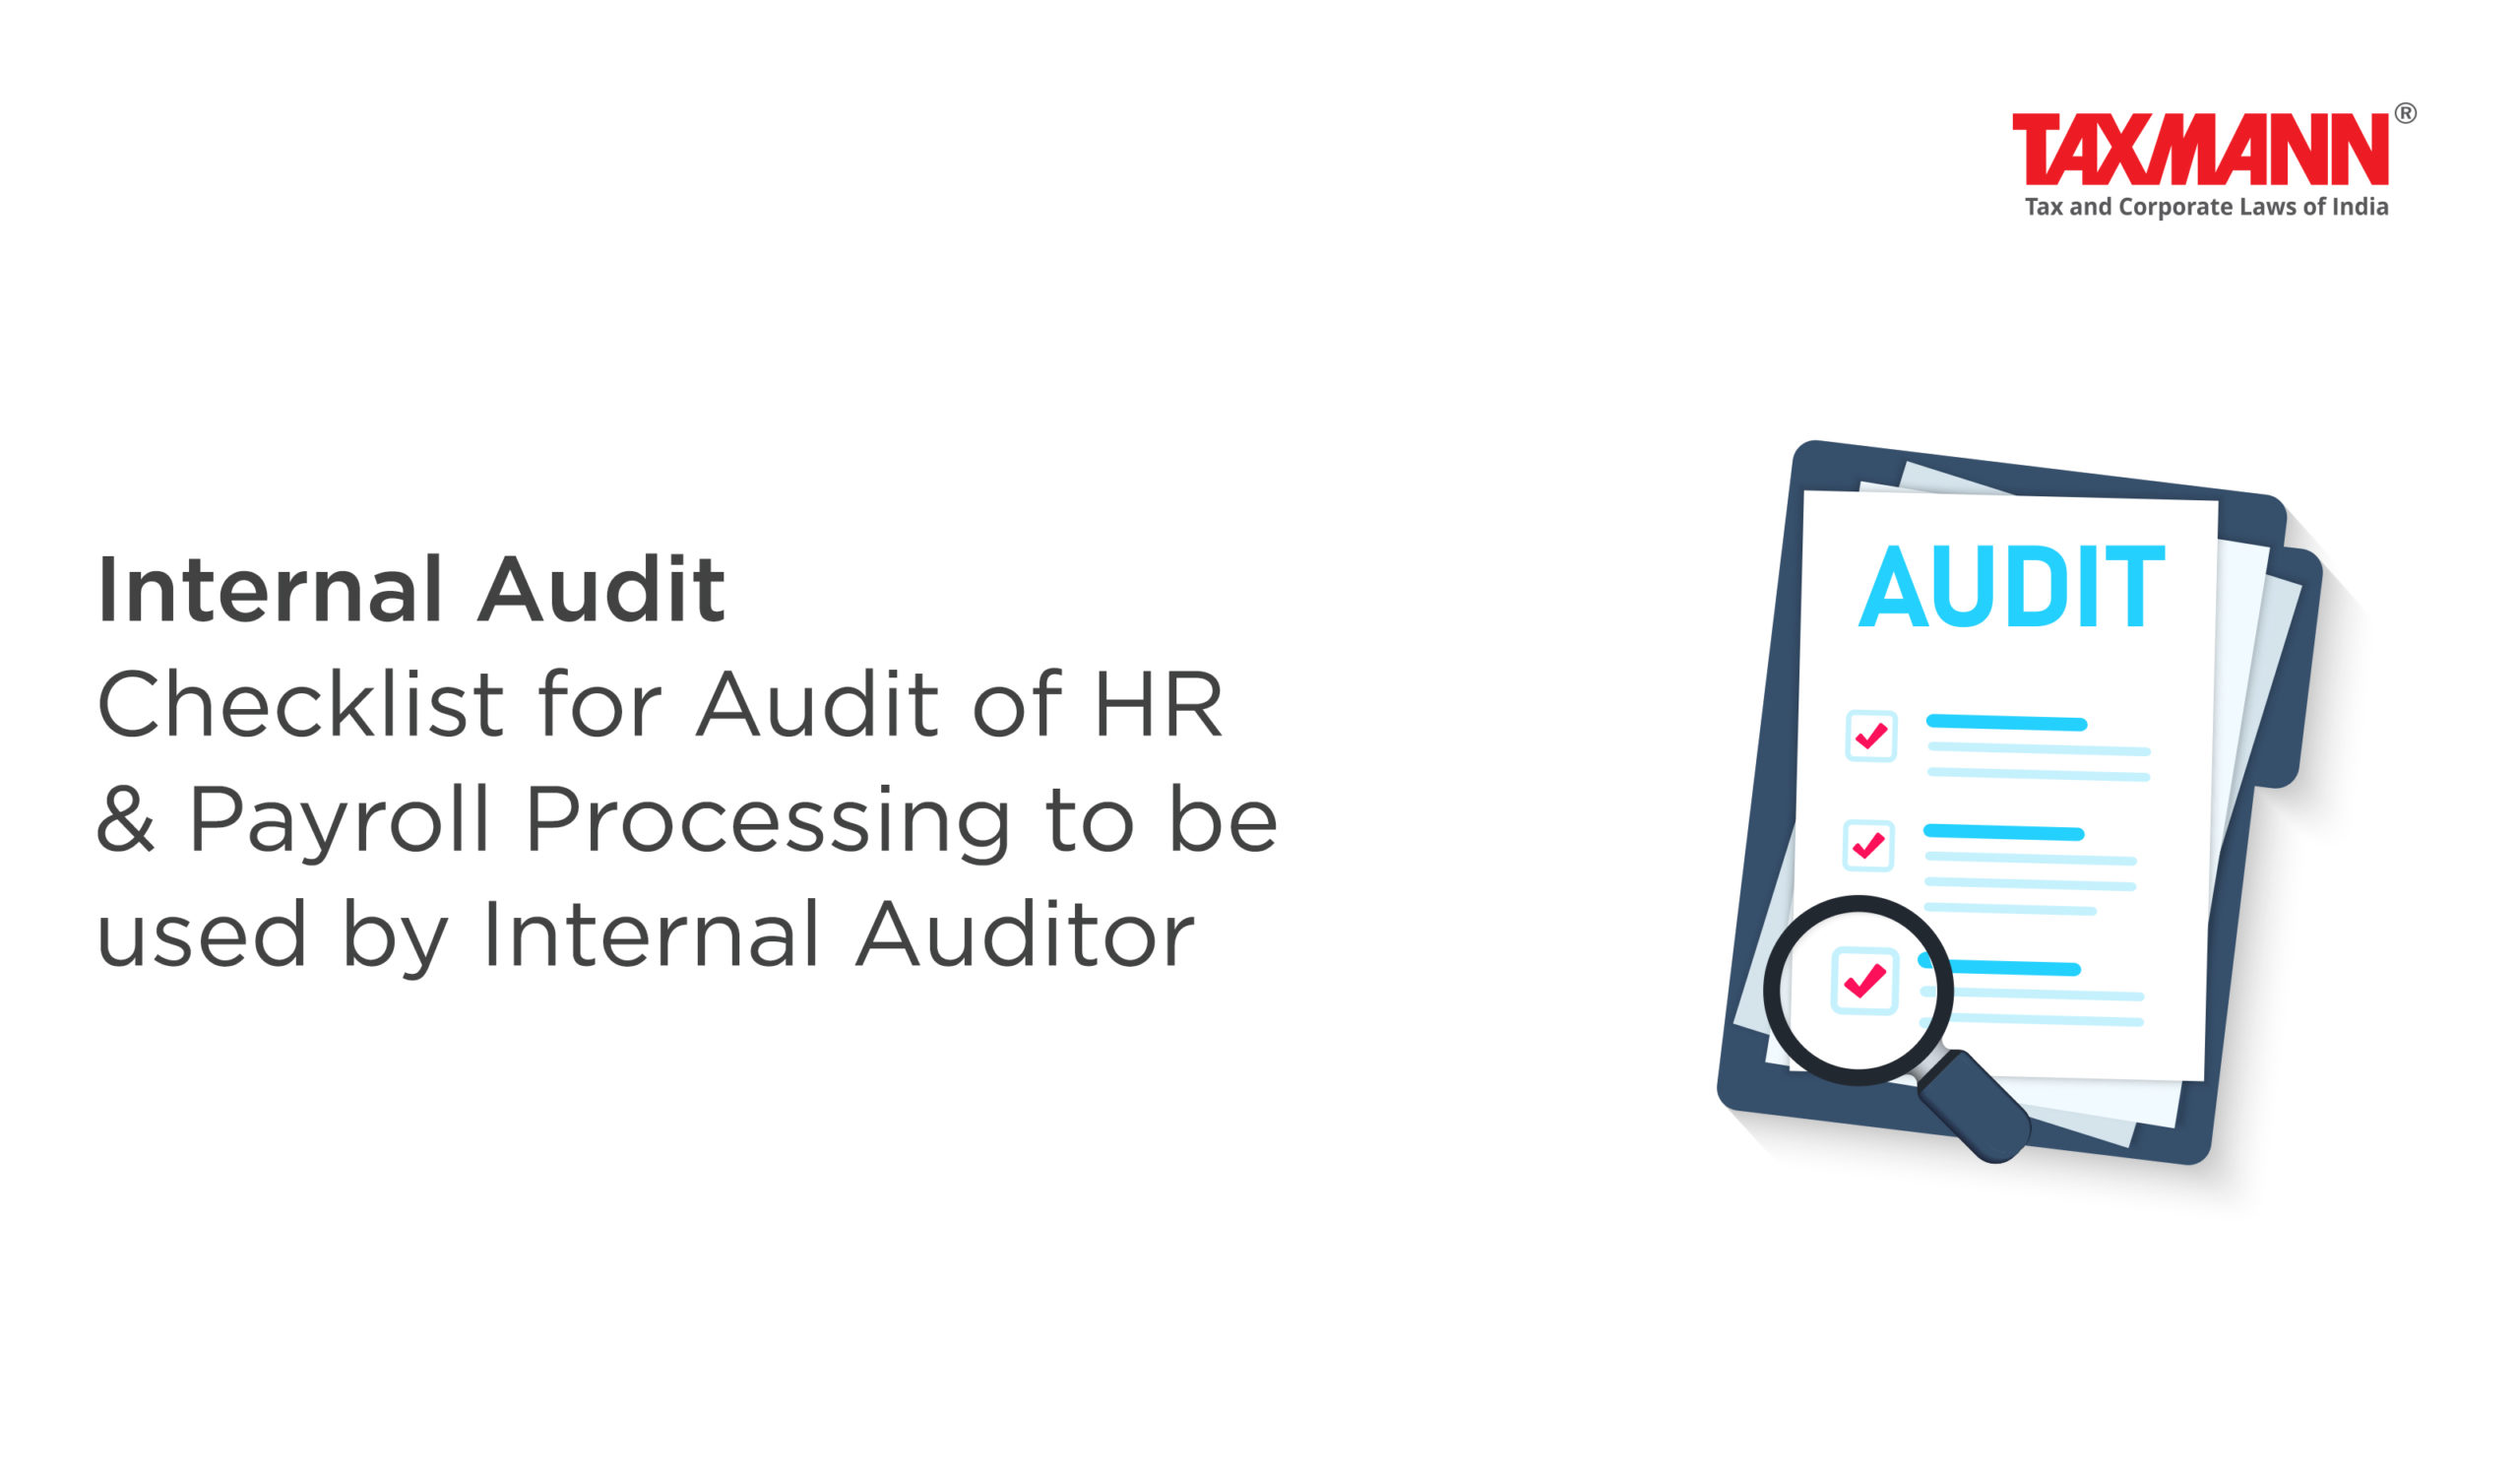 Checklist for Audit of HR & Payroll Processing